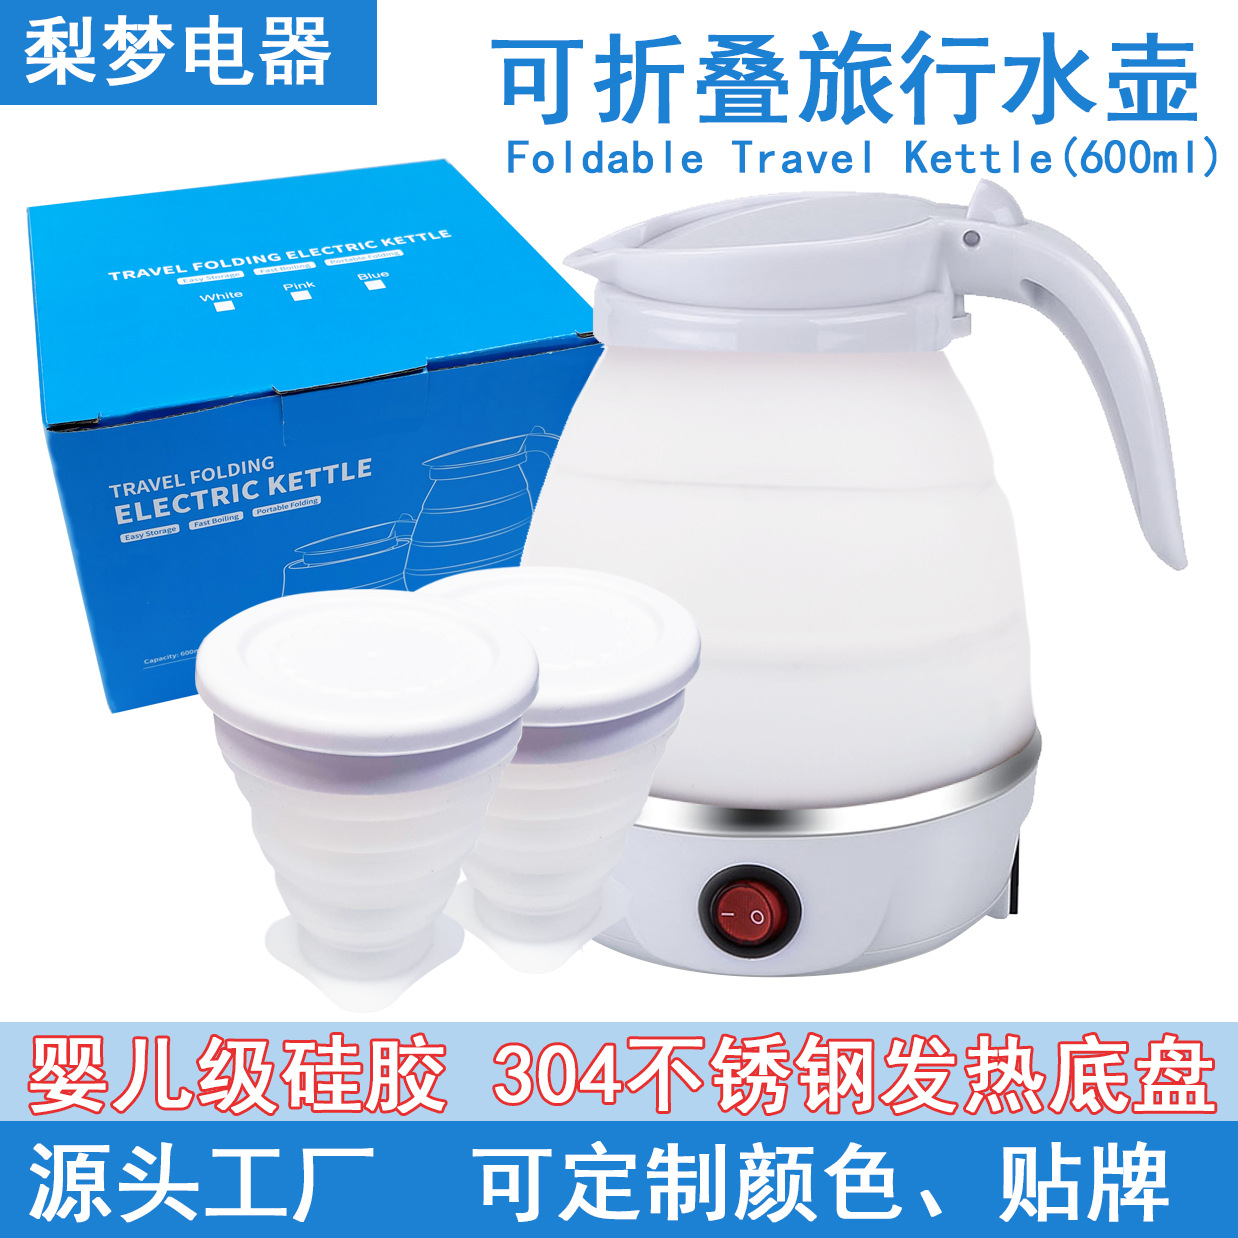 Travel Silicone Folding Kettle Electric Kettle Portable